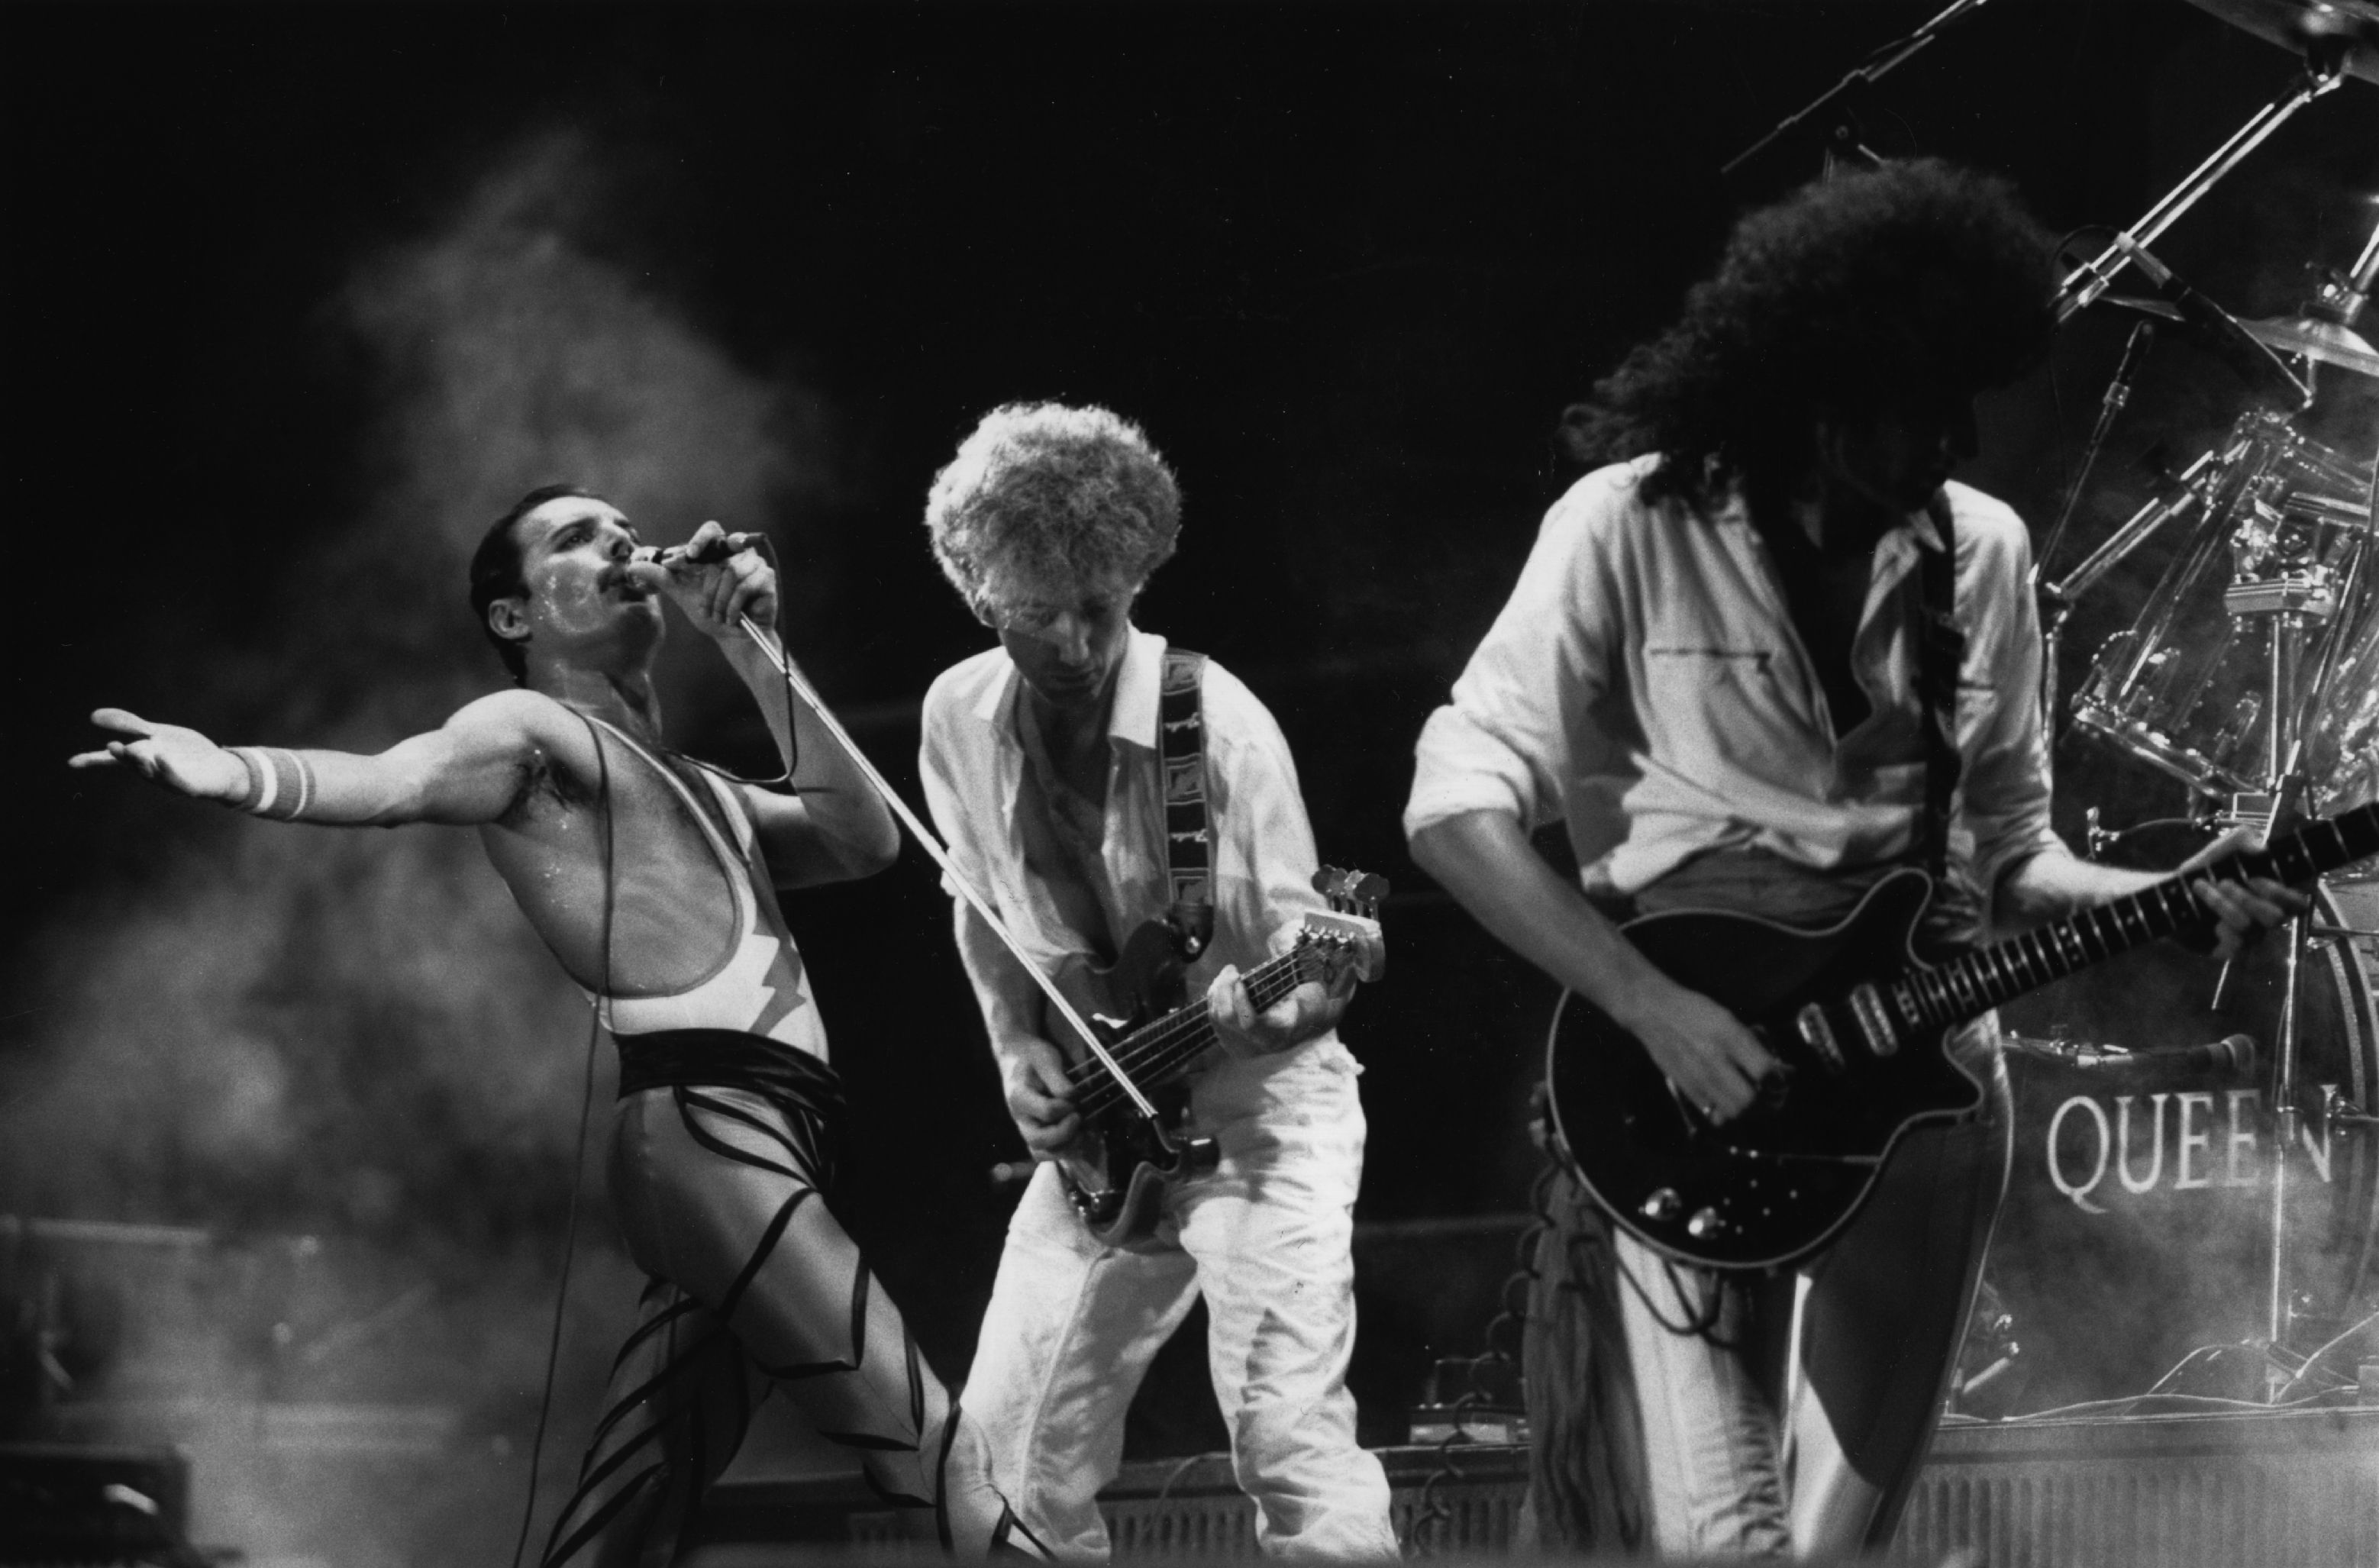 British rock group Queen in concert, from left to right; Freddie Mercury (Frederick Bulsara, 1946 - 1991), John Deacon, and Brian May.  Original Publication: People Disc - HU0463   (Photo by Express Newspapers/Getty Images)